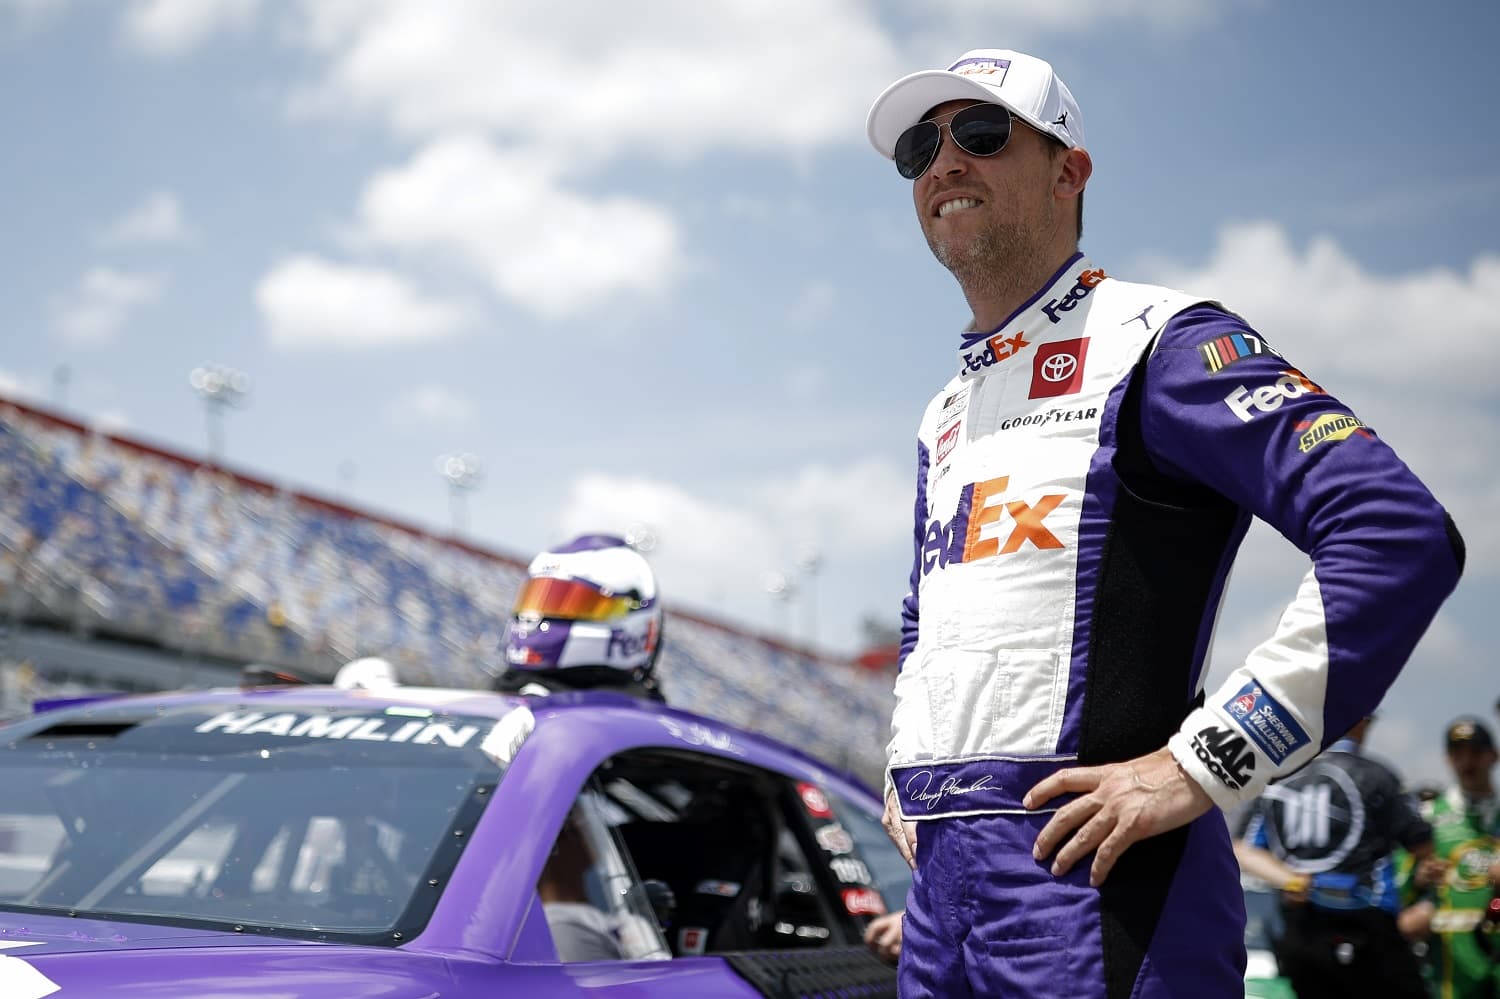 Denny Hamlin drives during qualifying for the NASCAR Cup Series Goodyear 400 at Darlington Raceway on May 13, 2023. | Jared C. Tilton/Getty Images